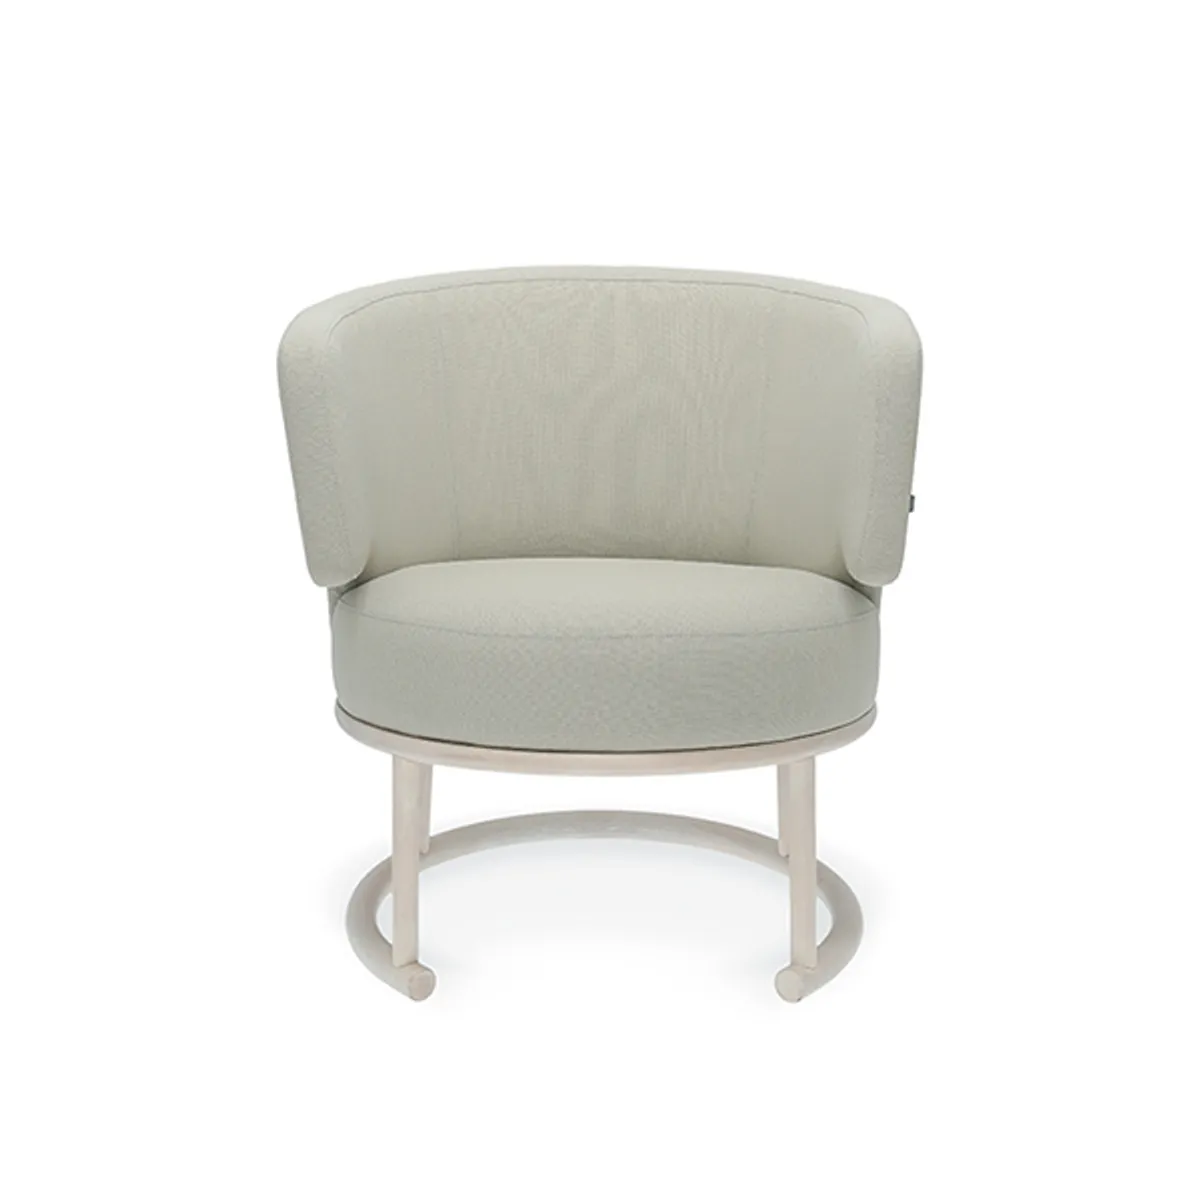 Bakerloo Lounge Chair Contemporary Hotel Furniture By Insideoutcontracts 024